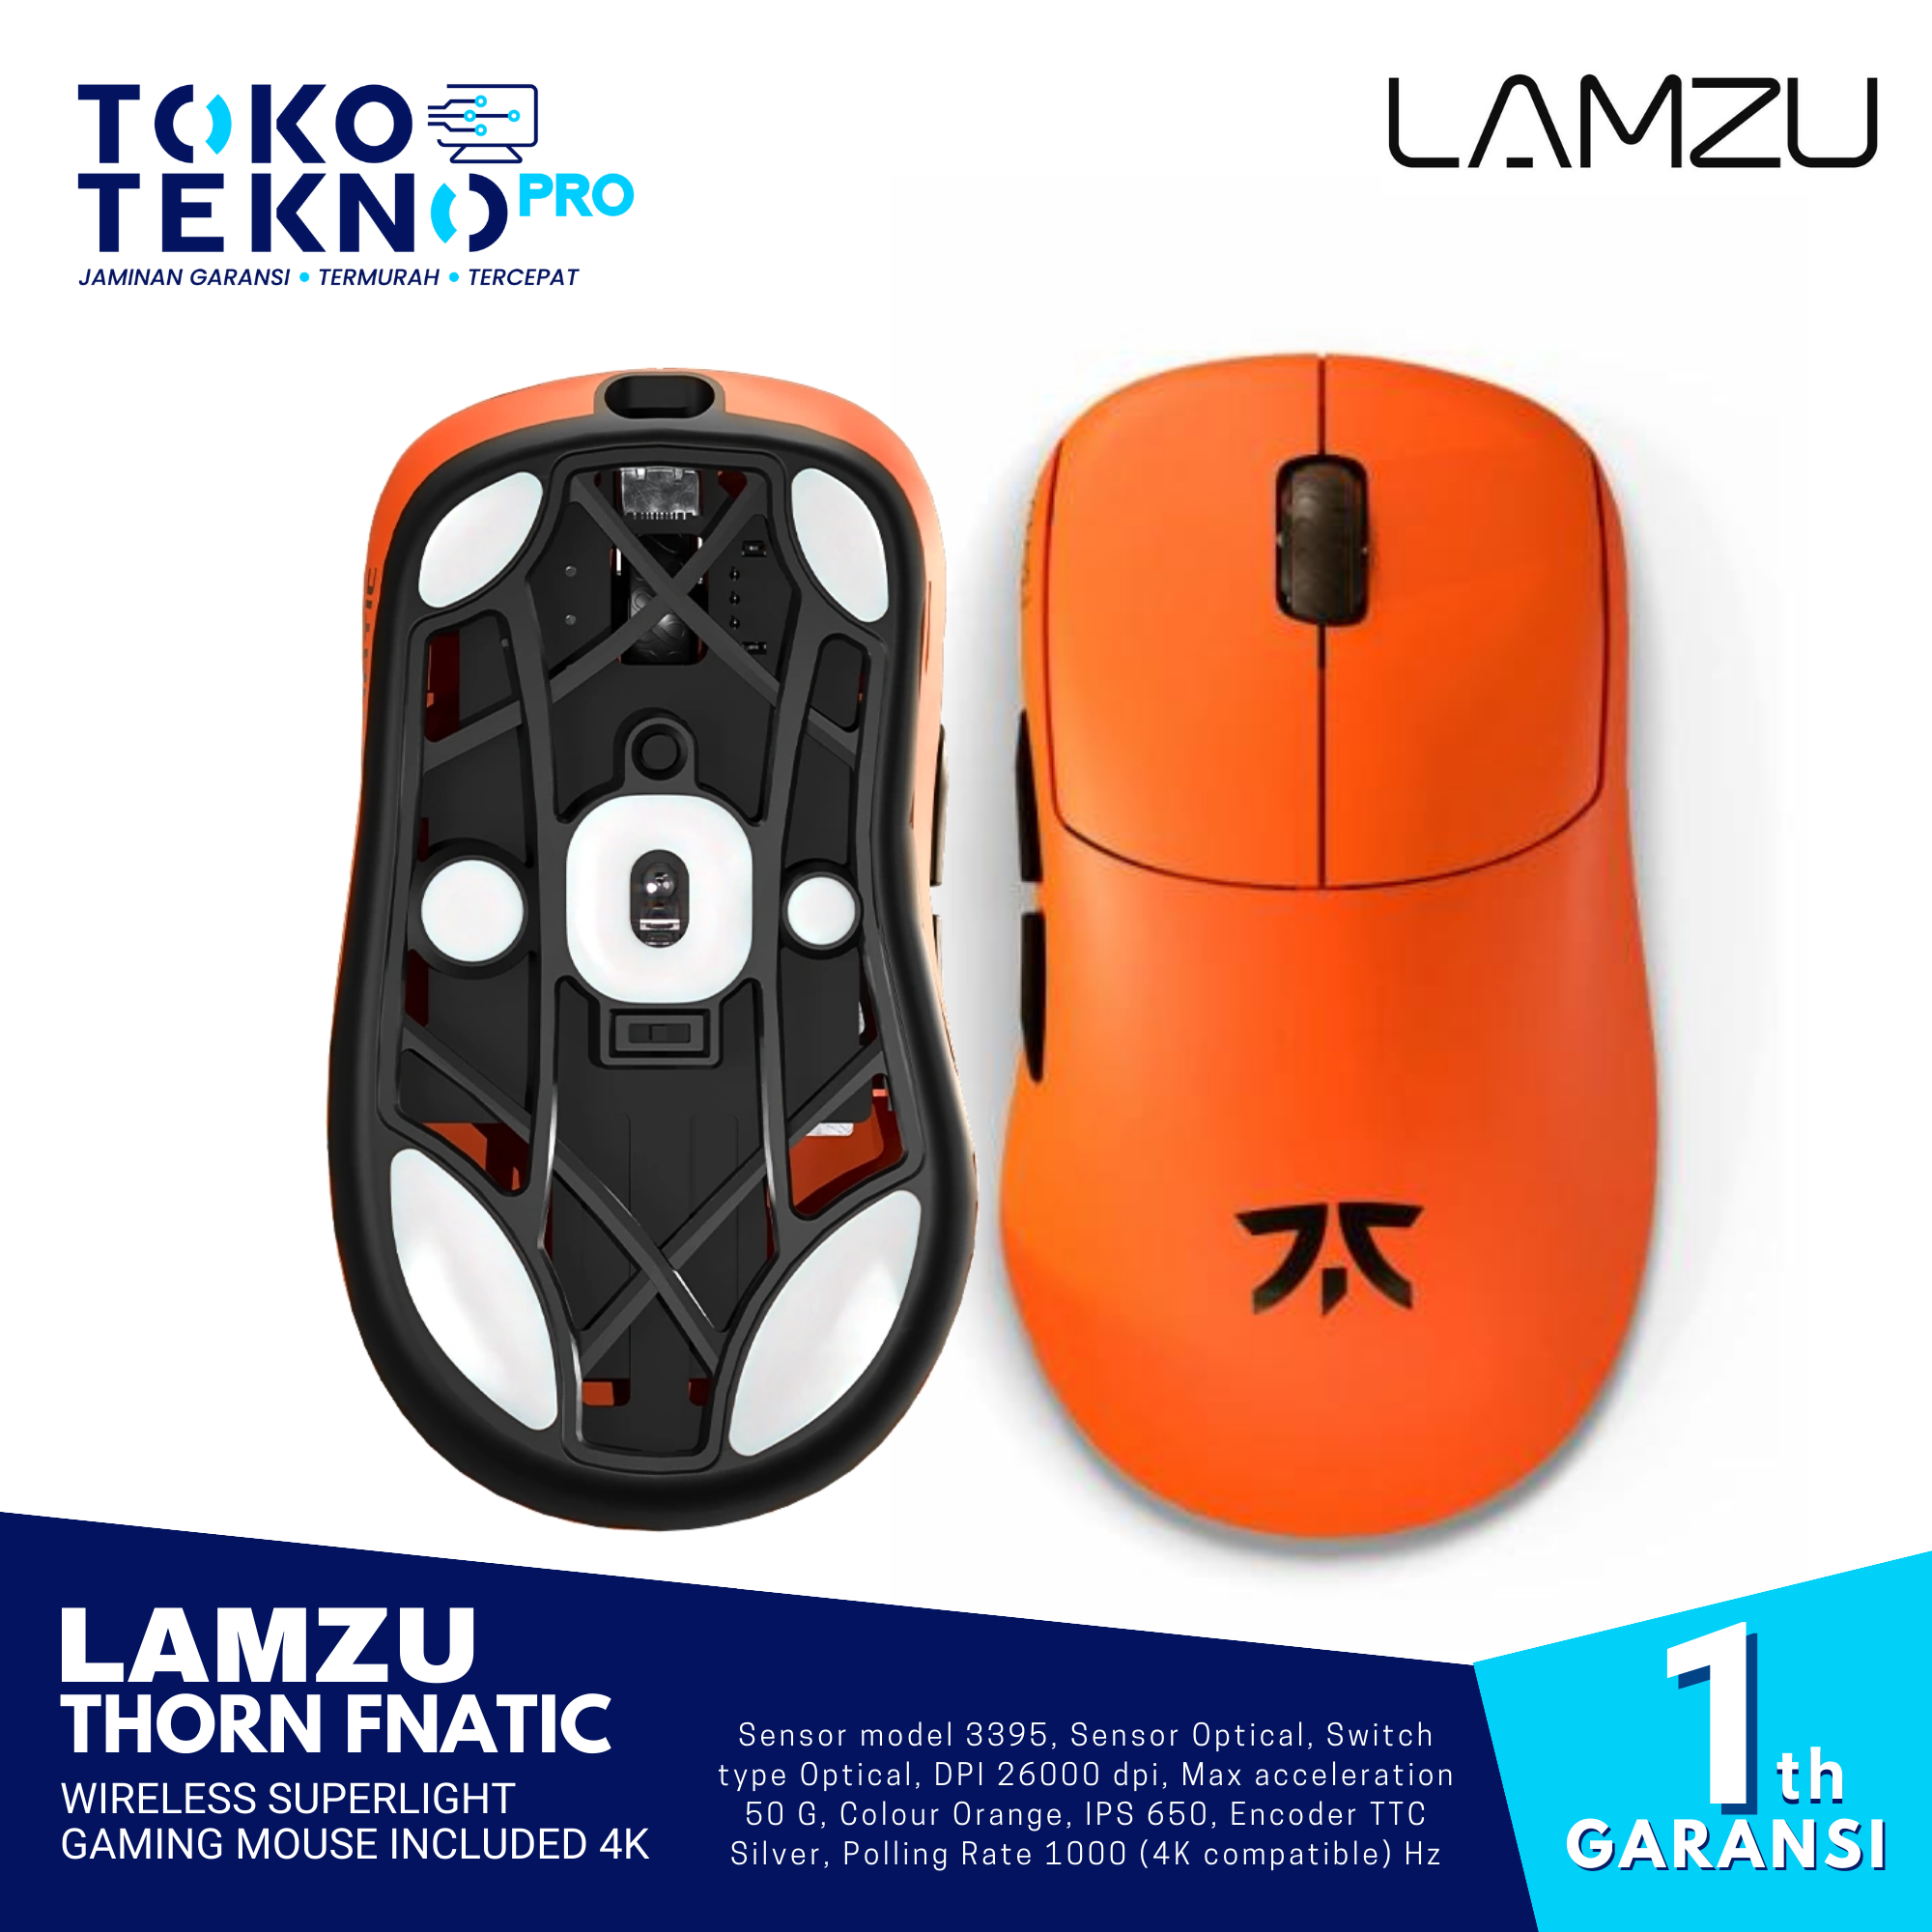 Lamzu Thorn Fnatic Wireless Superlight Gaming Mouse Included 4K